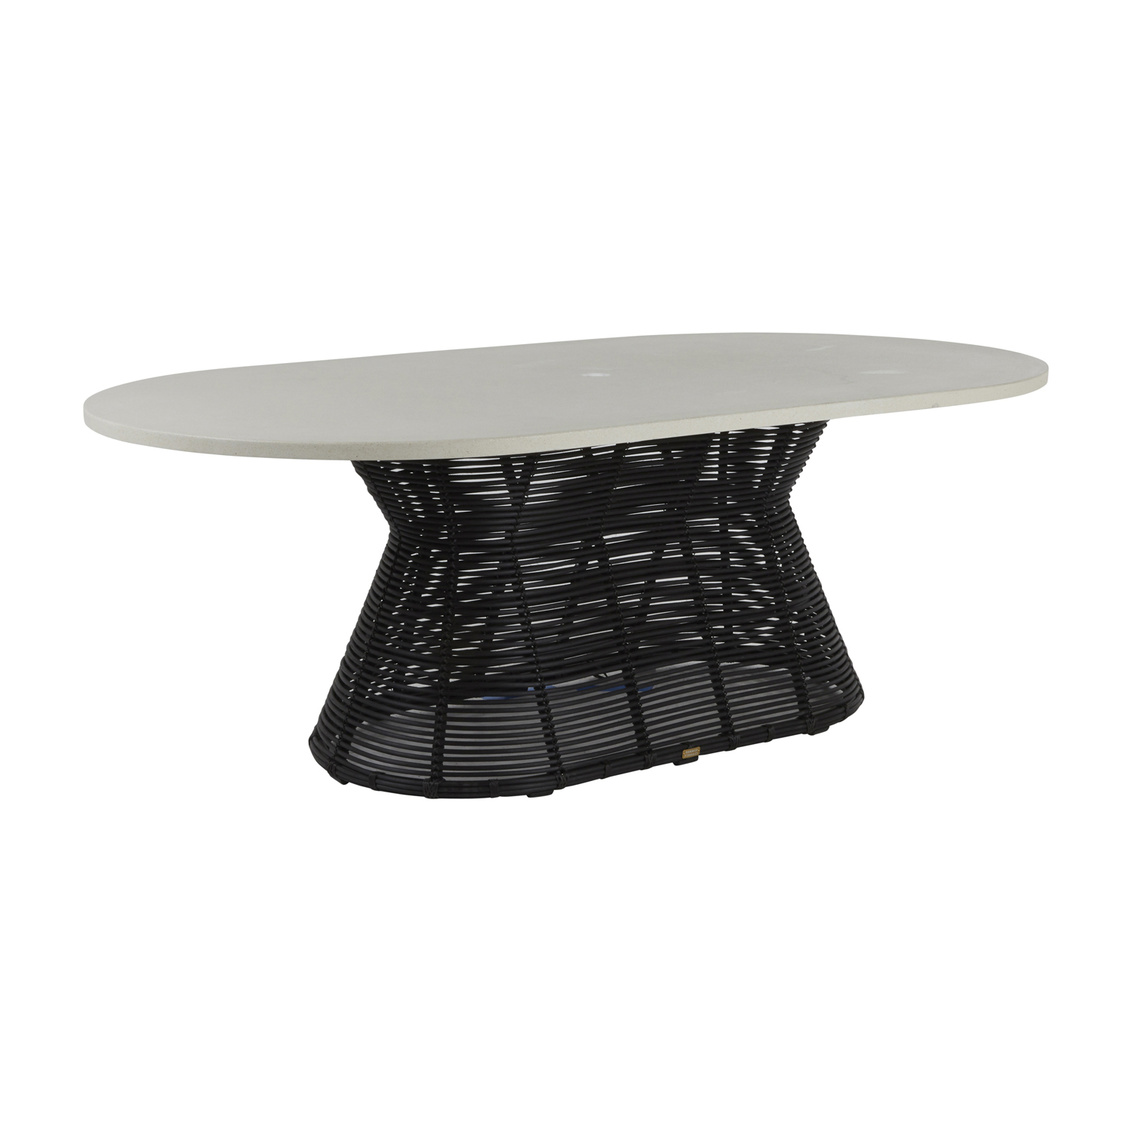 harris oval dining table in travertine superstone top (w/ umbrella hole) and onyx woven base product image